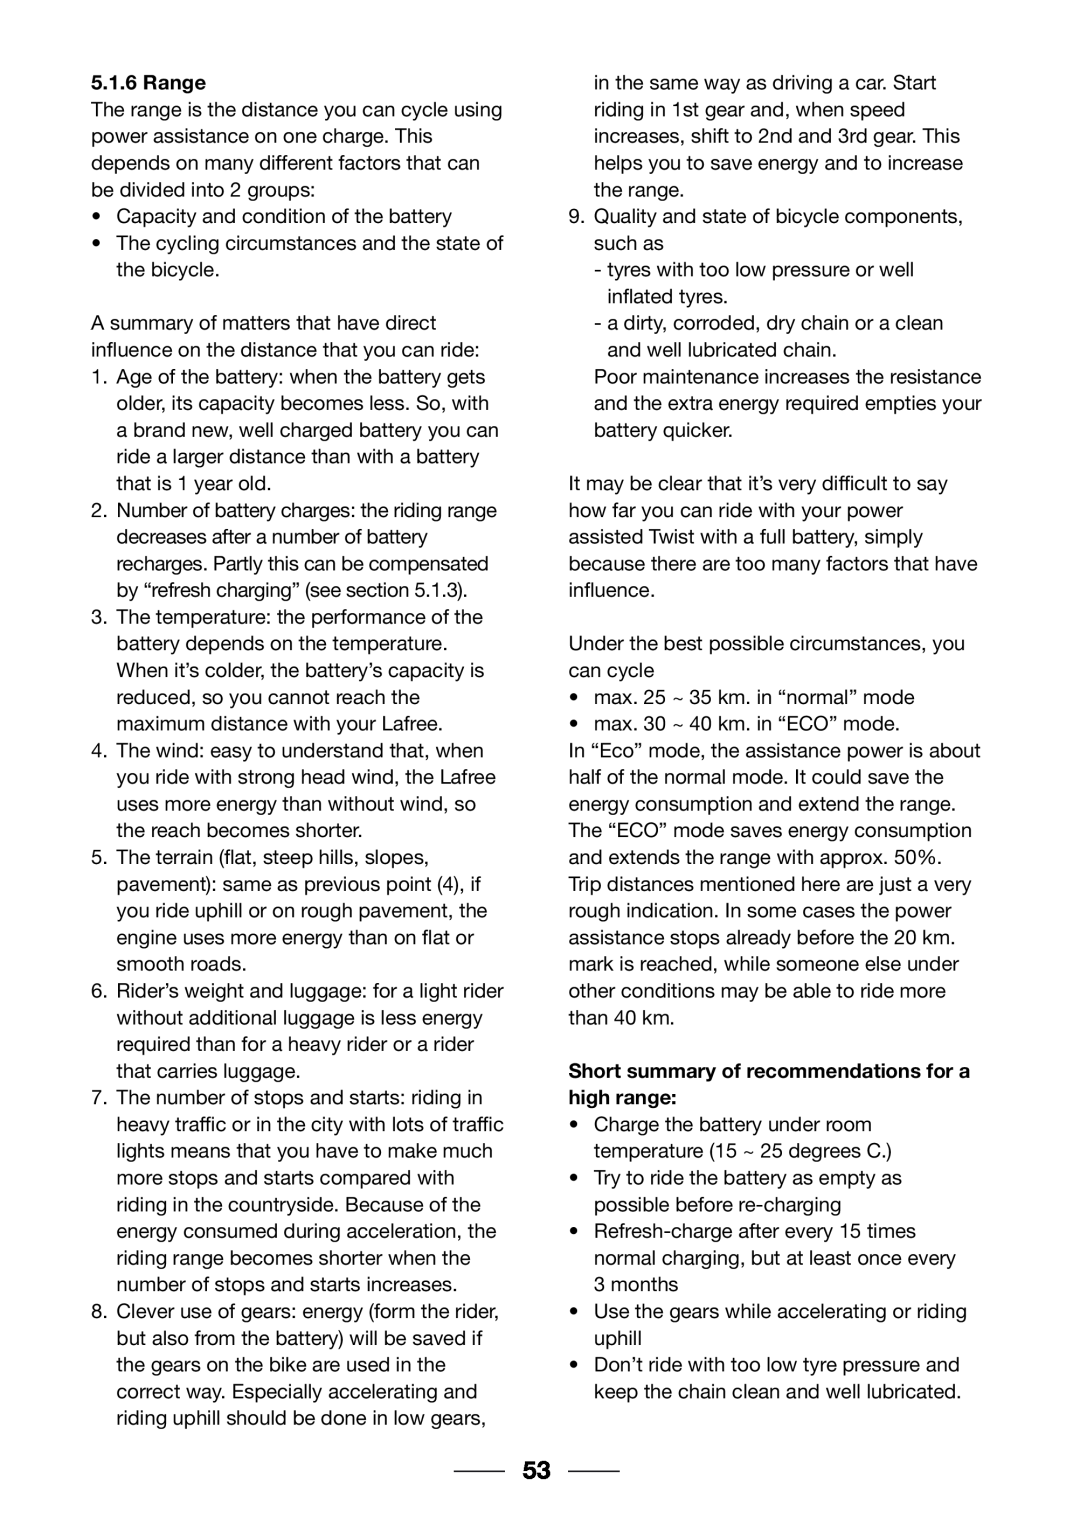 Giant 2002 Motorized Bicycle owner manual Range, Short summary of recommendations for a high range 